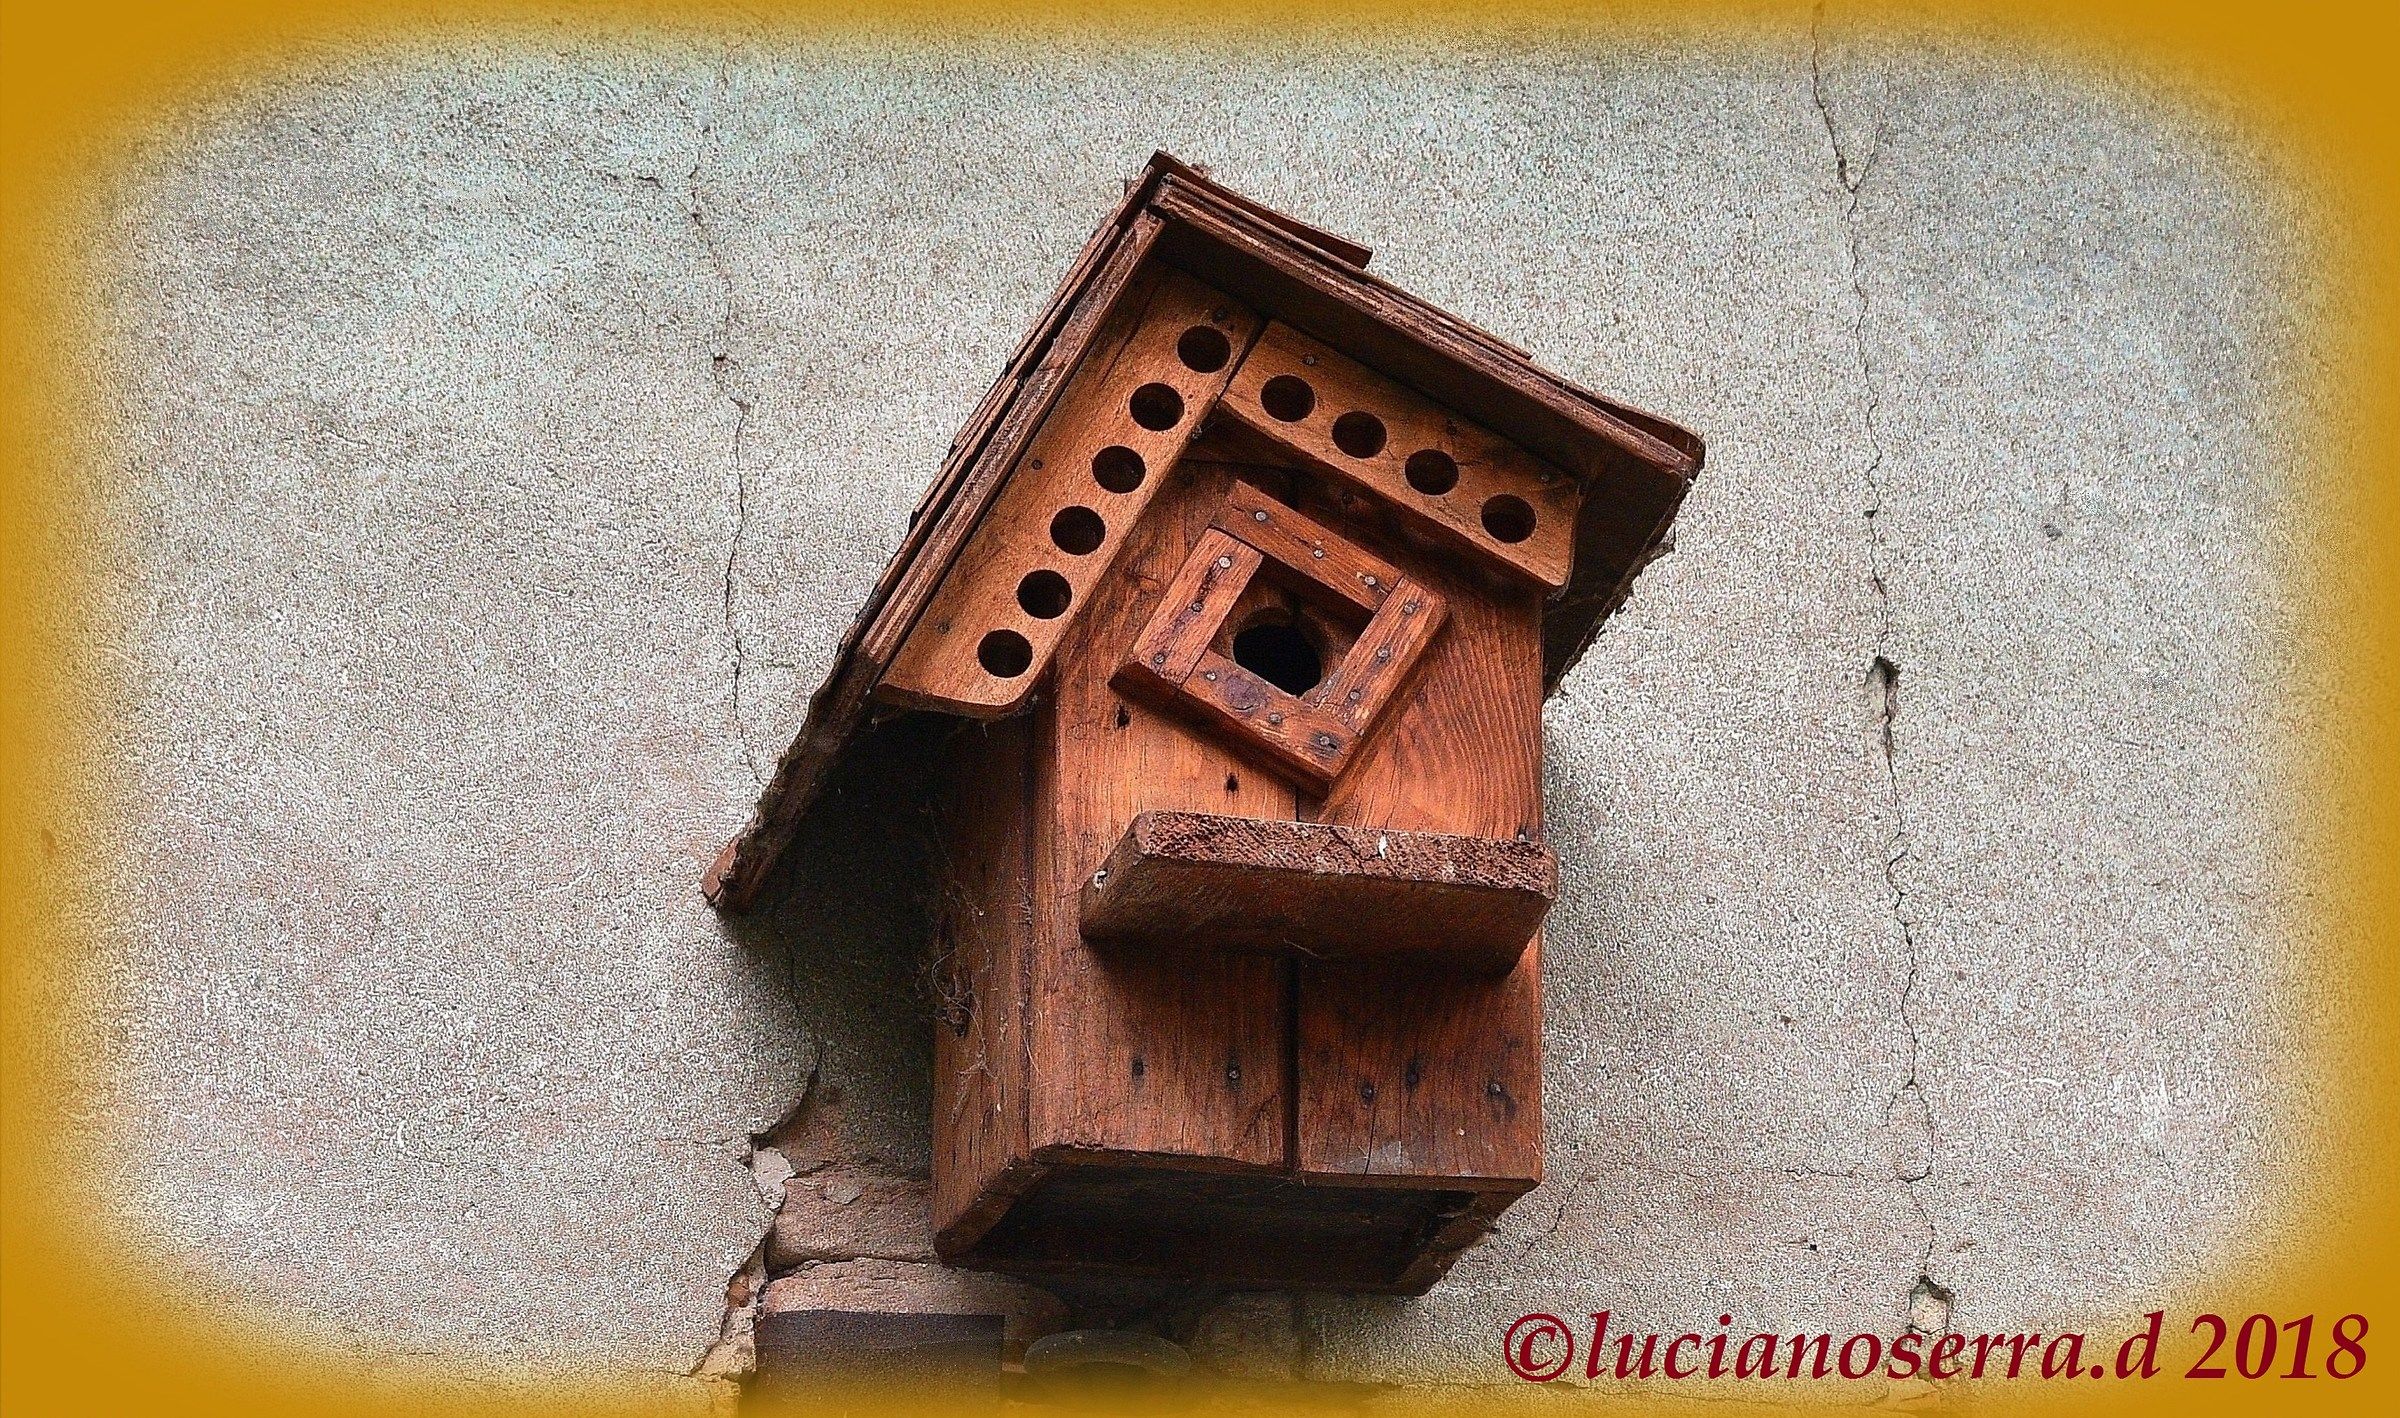 Small House for small birds...